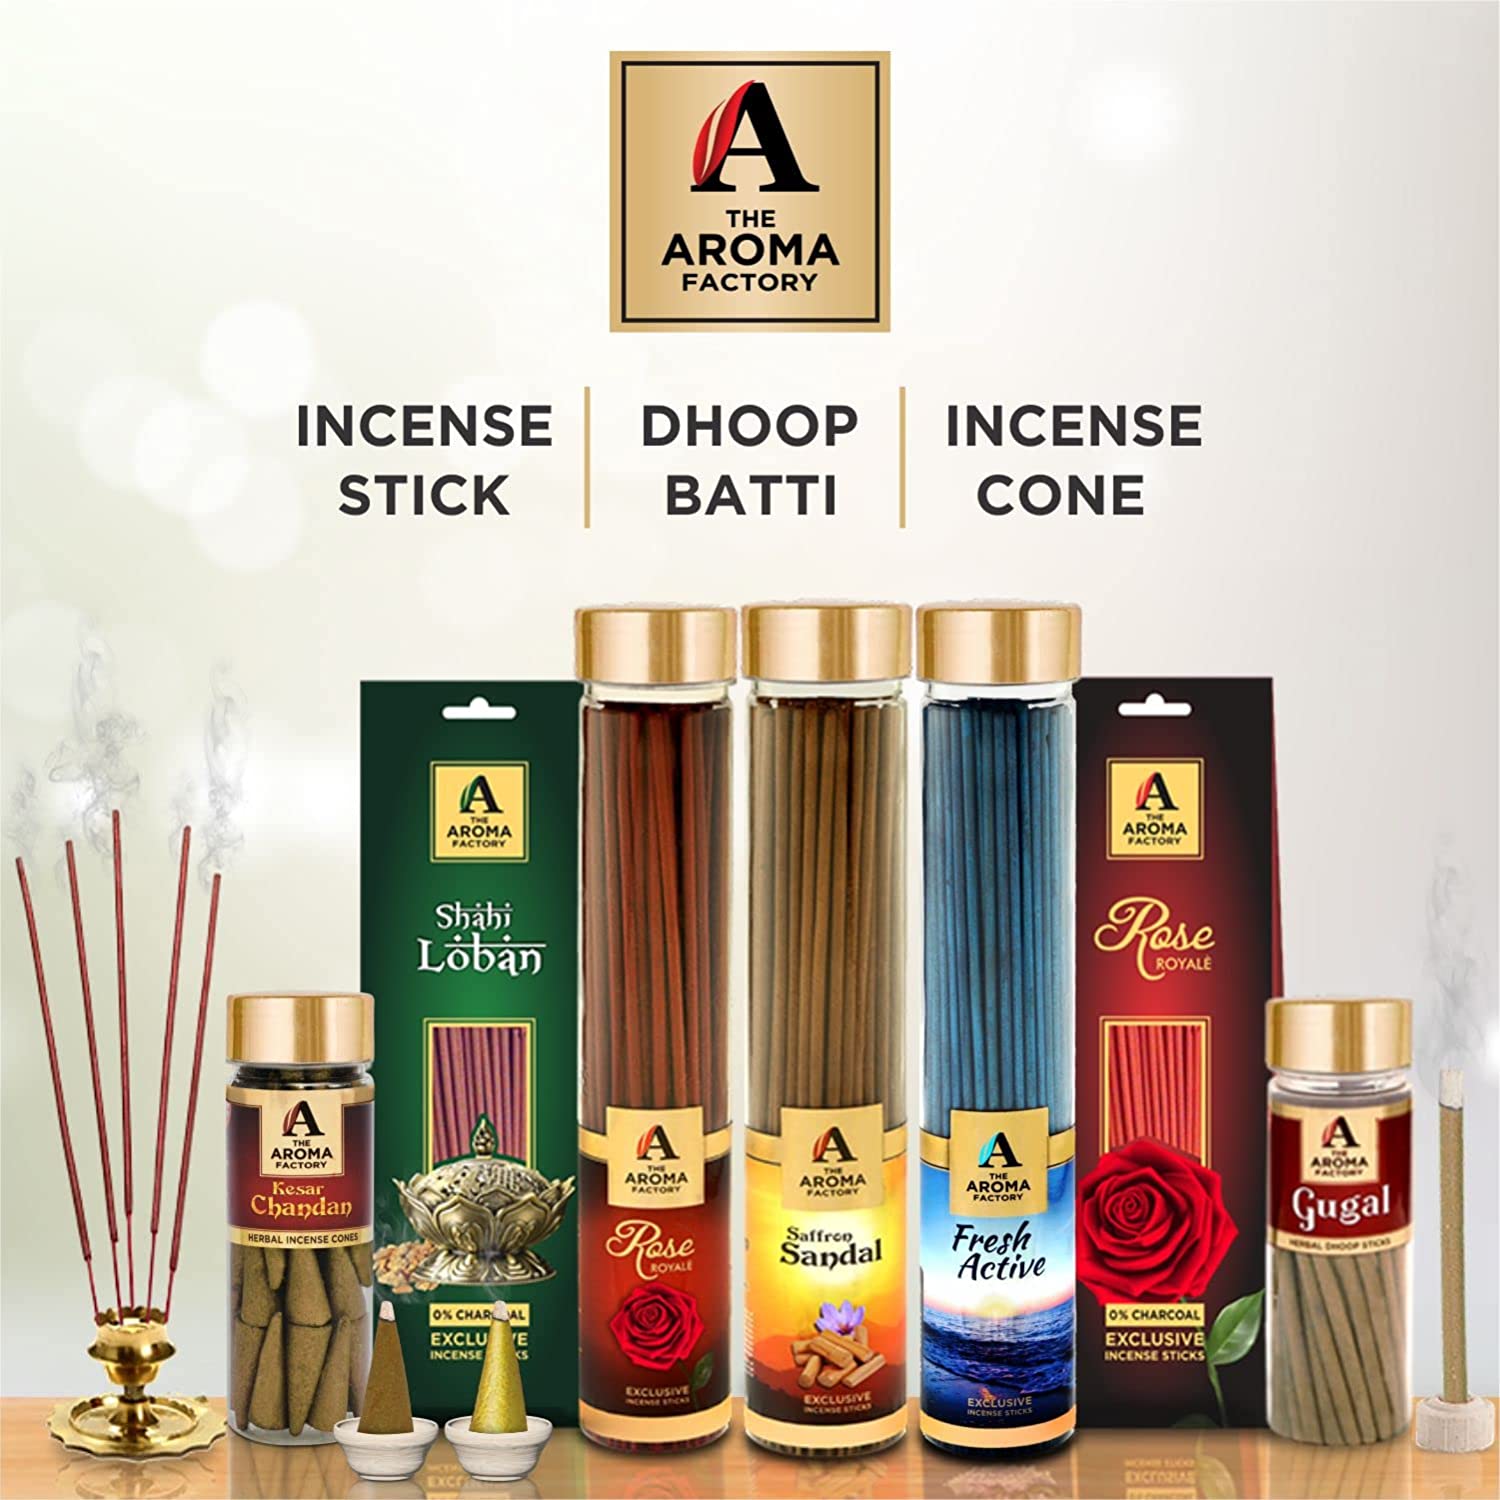 The Aroma Factory Incense Dhoop Cone for Puja, Loban (100% Herbal & 0% Charcoal) 1 Bottle x 30 Cones